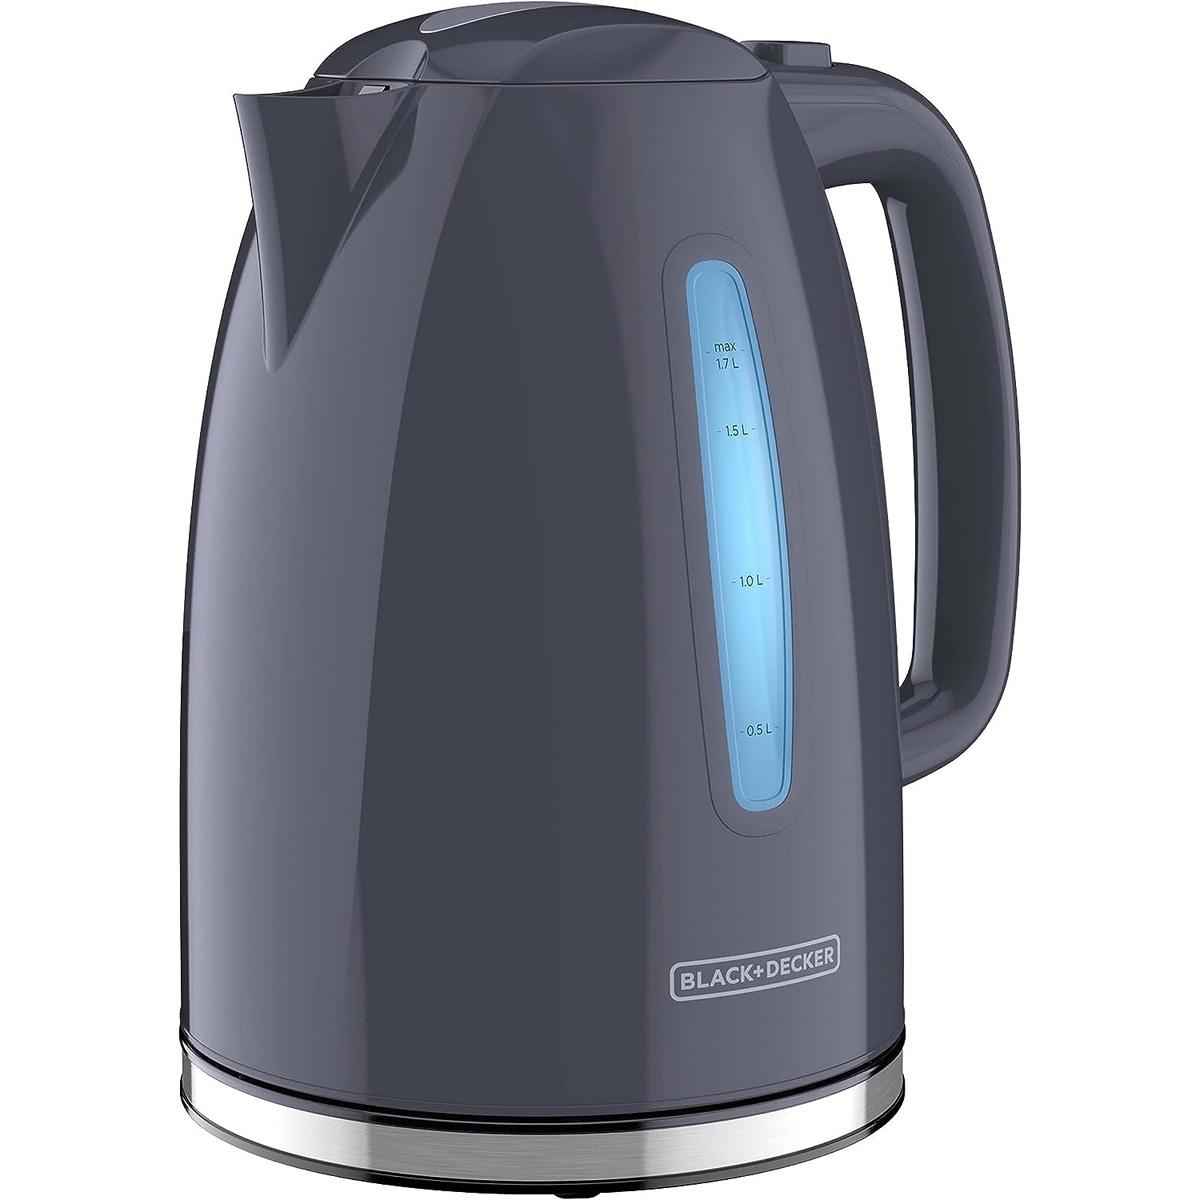 Black and Decker 1.7L Rapid Boil Electric Kettle for $18.48